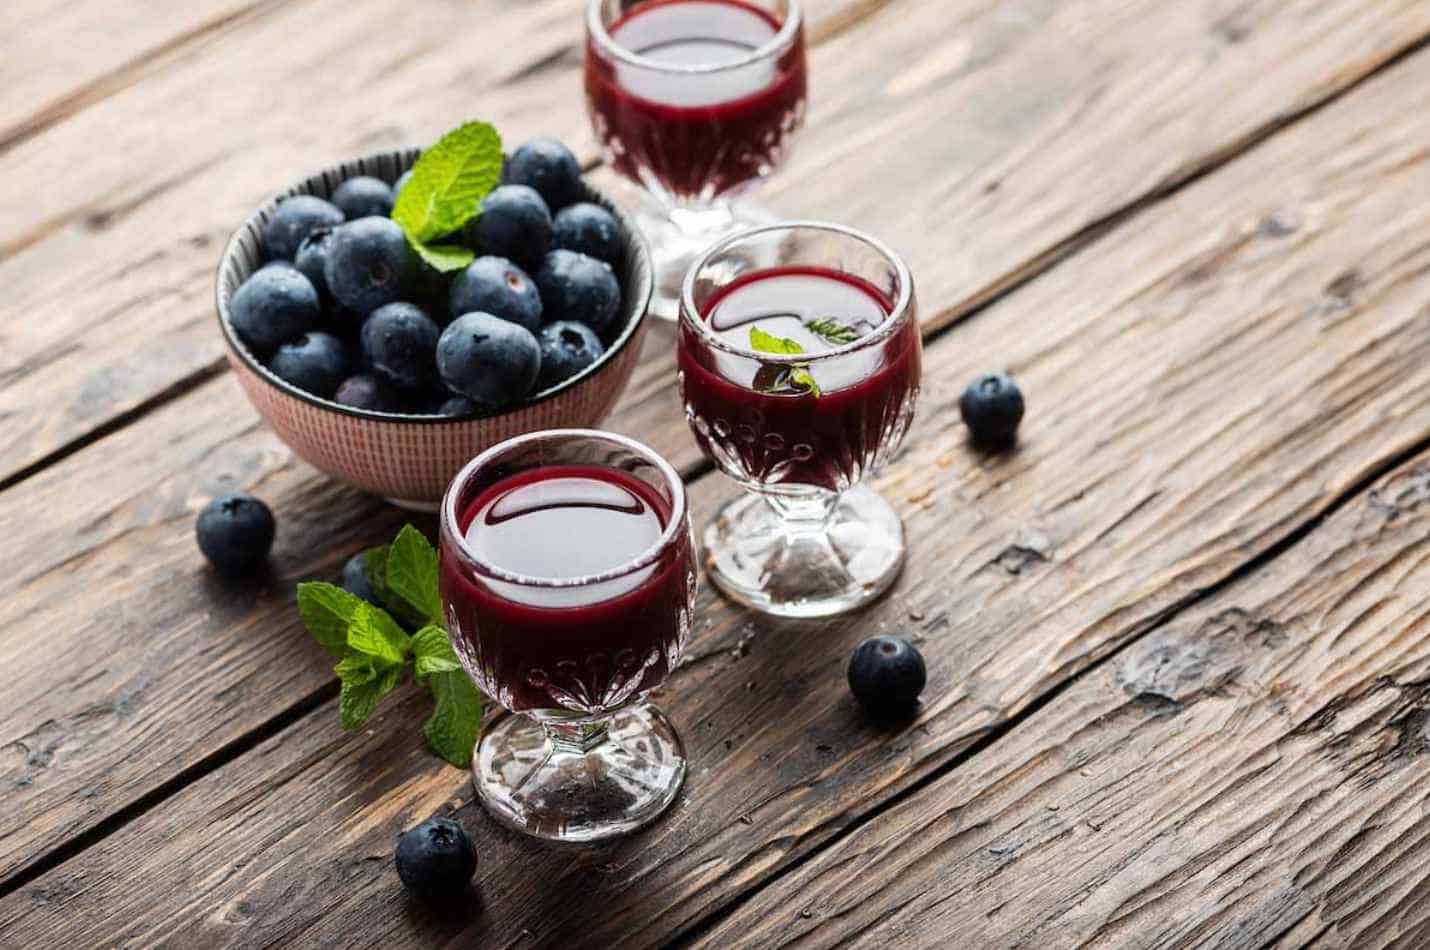 What is blueberry wine